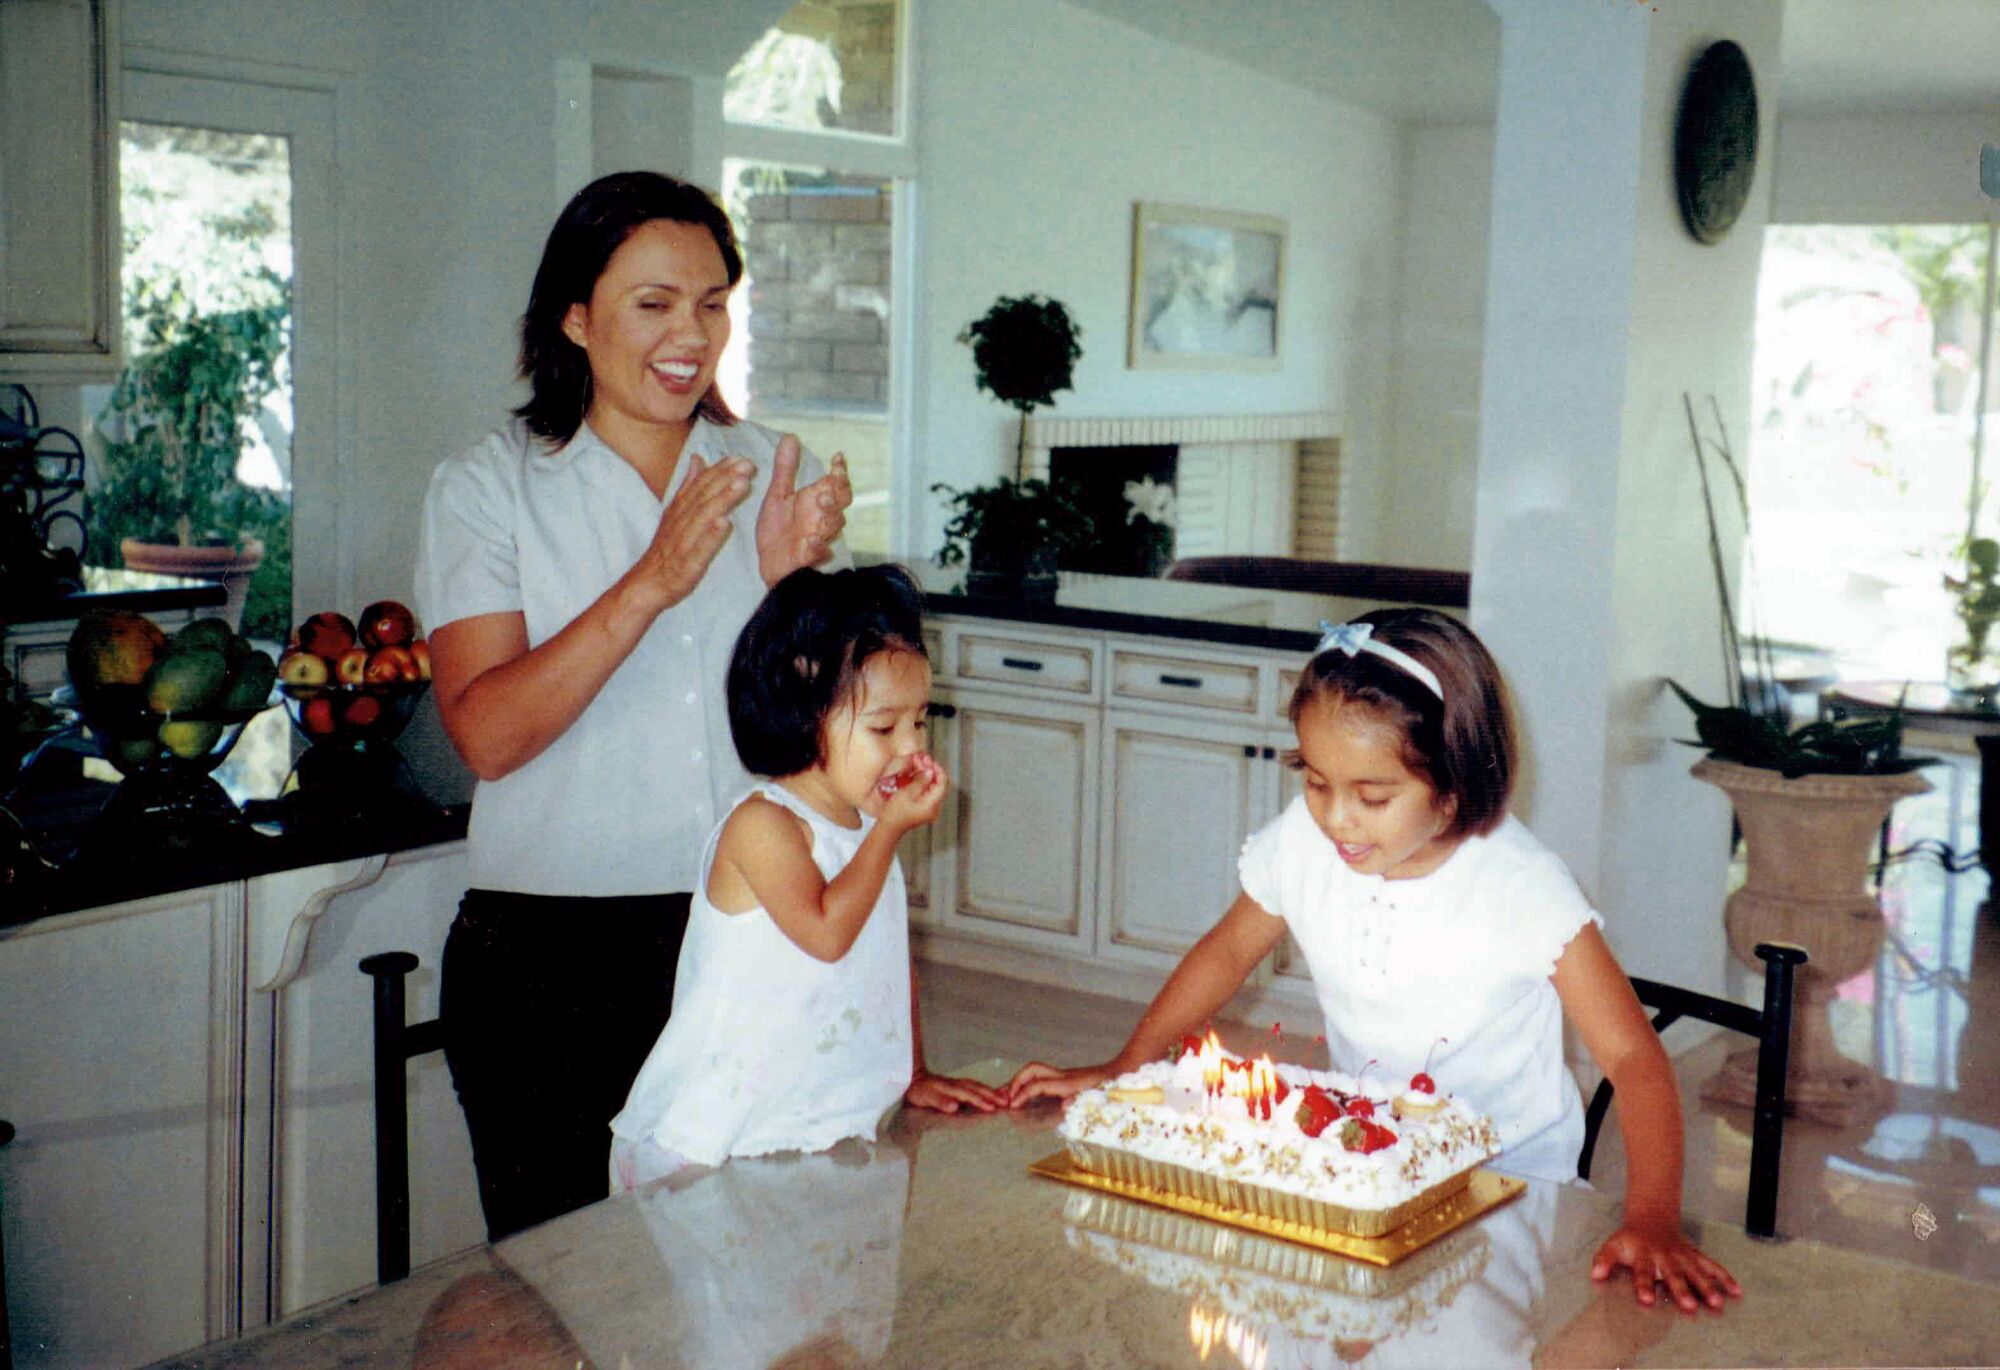 Gloria Verduzco claps as her eldest daughter, Ilianna Salas, blows out birthday candles and her youngest daughter watches.